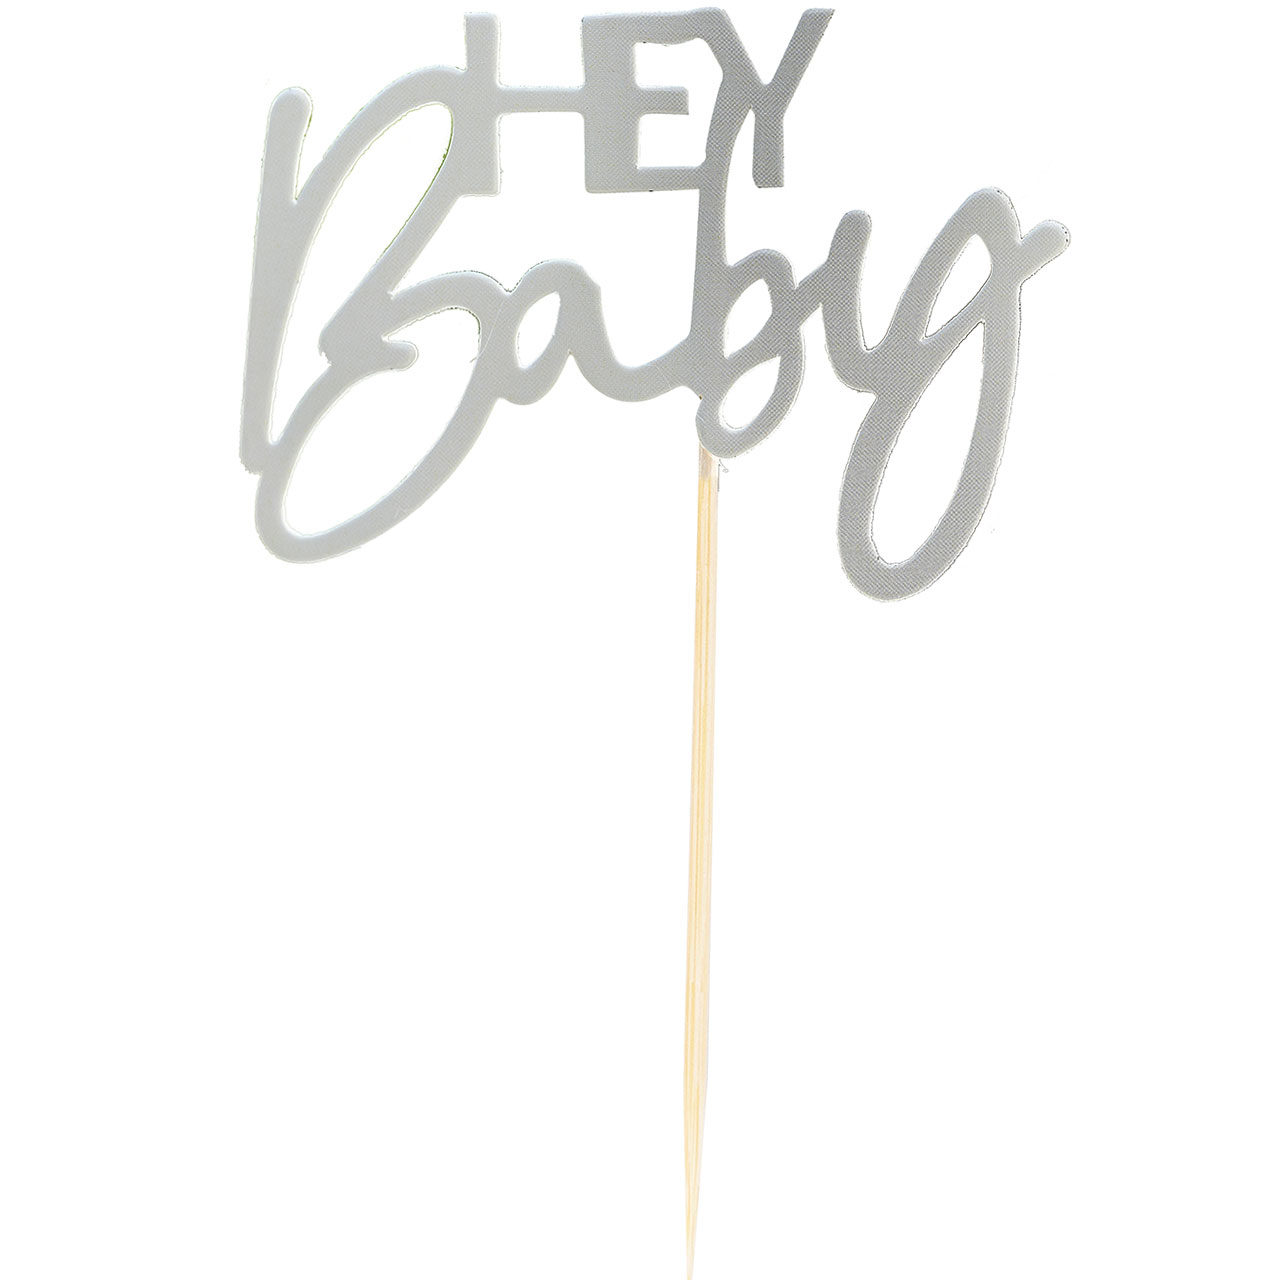 Cupcake Toppers - Hey Baby